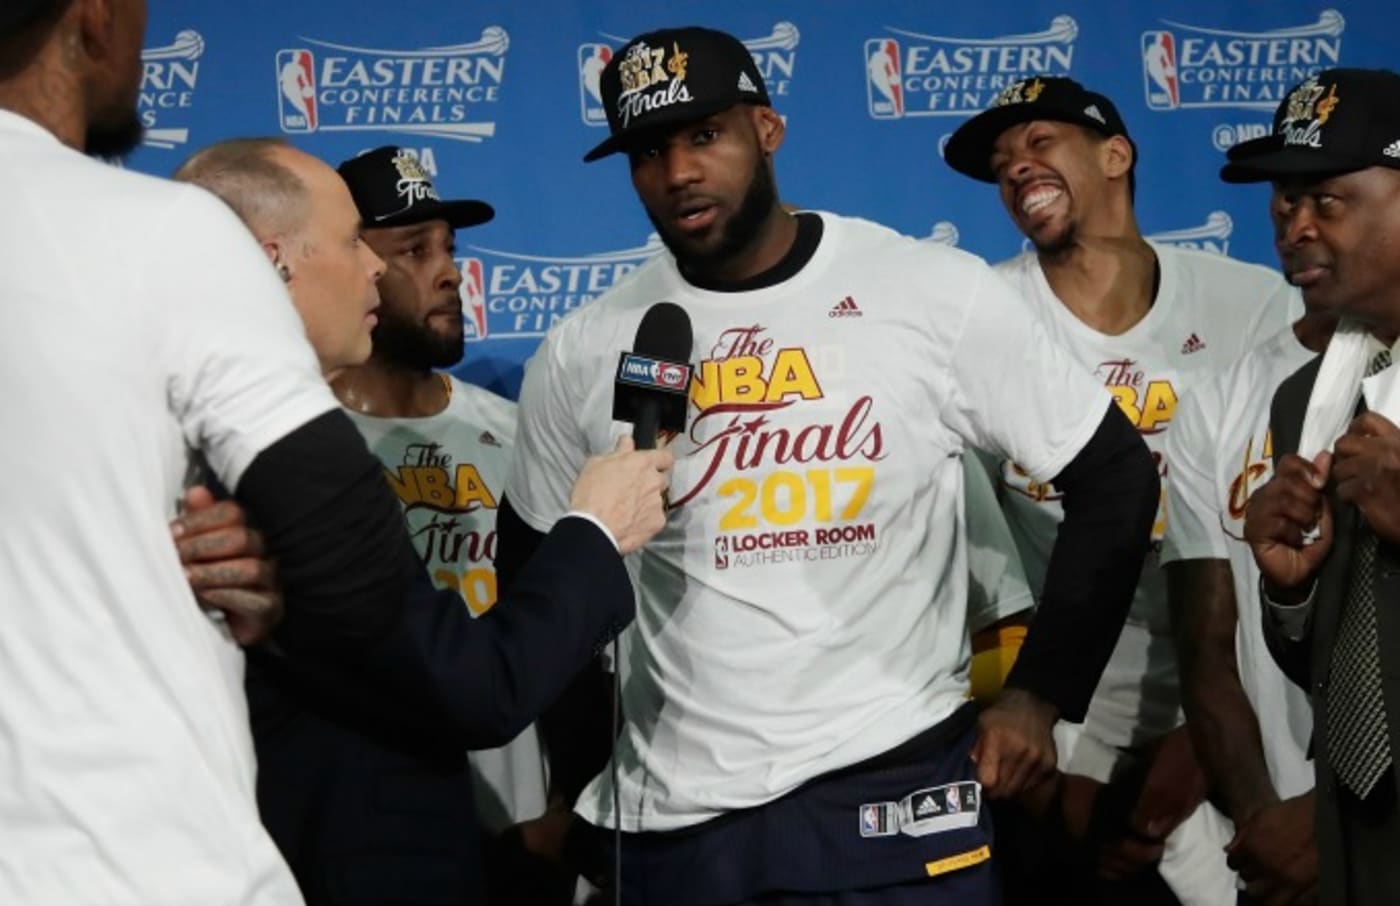 LeBron James talks about the Cavaliers winning the Eastern Conference Finals.